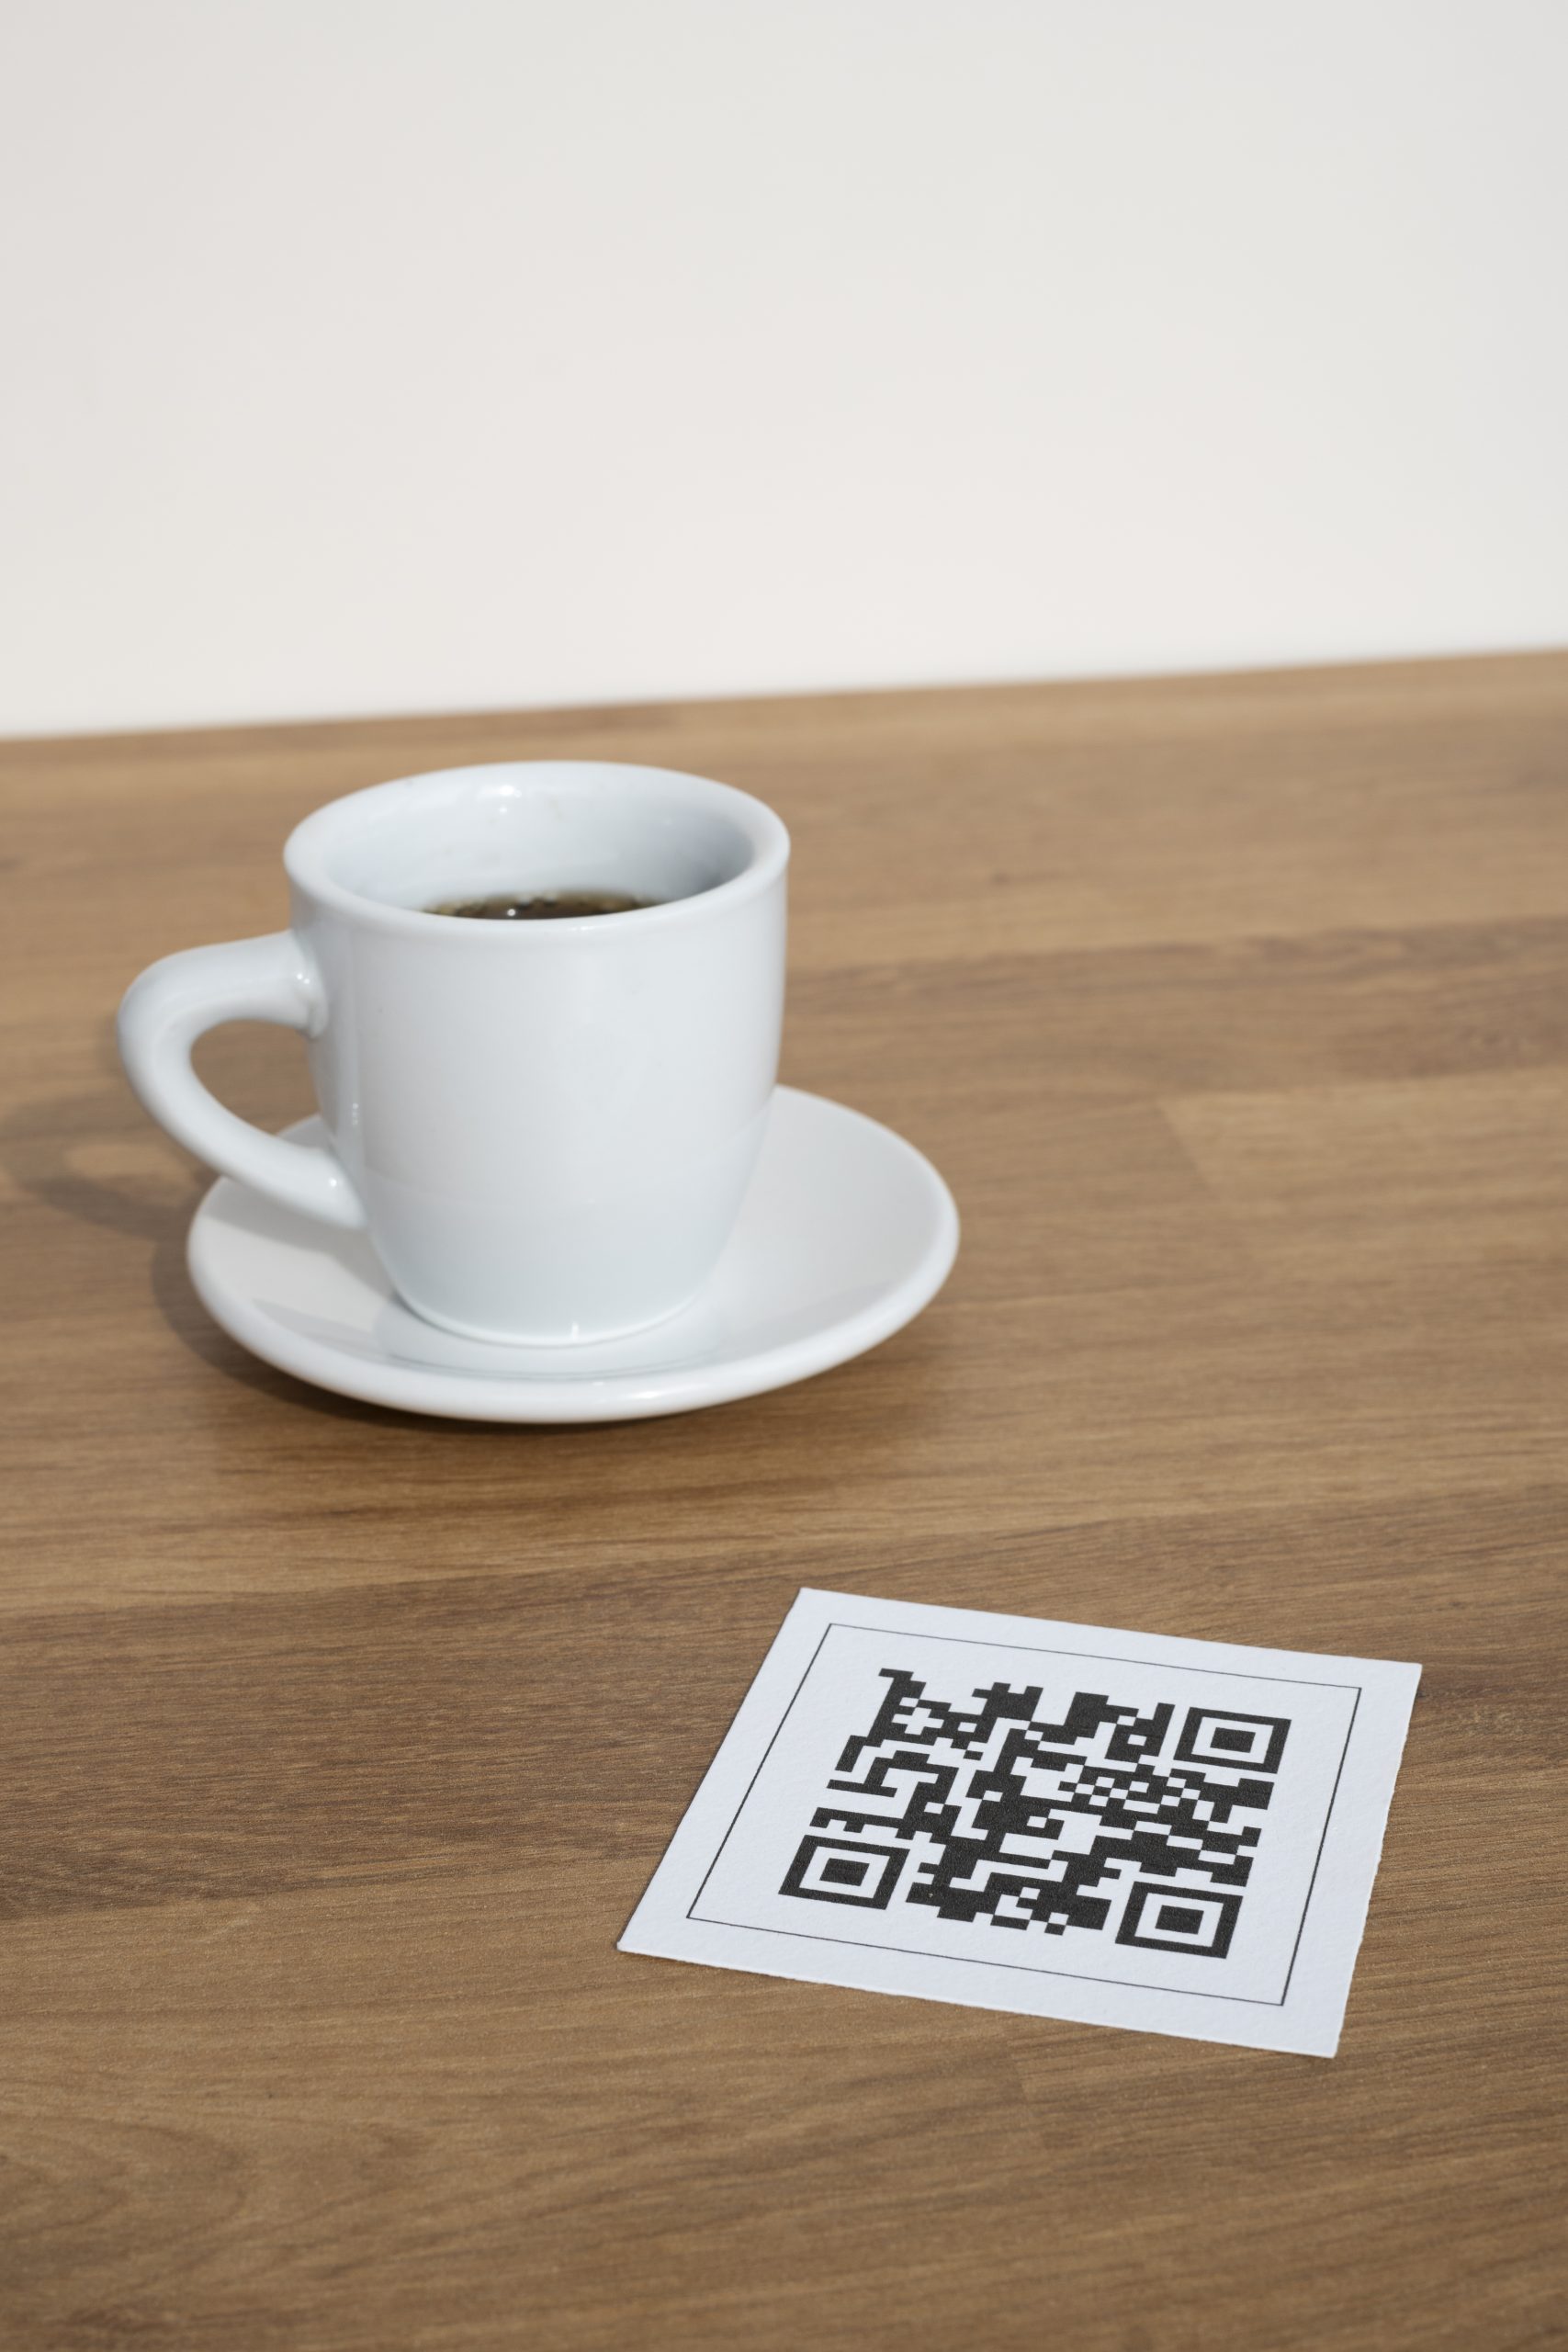 qr-code-online-menu-service-table-restaurant-new-contactless-technology-lifestyle-protect